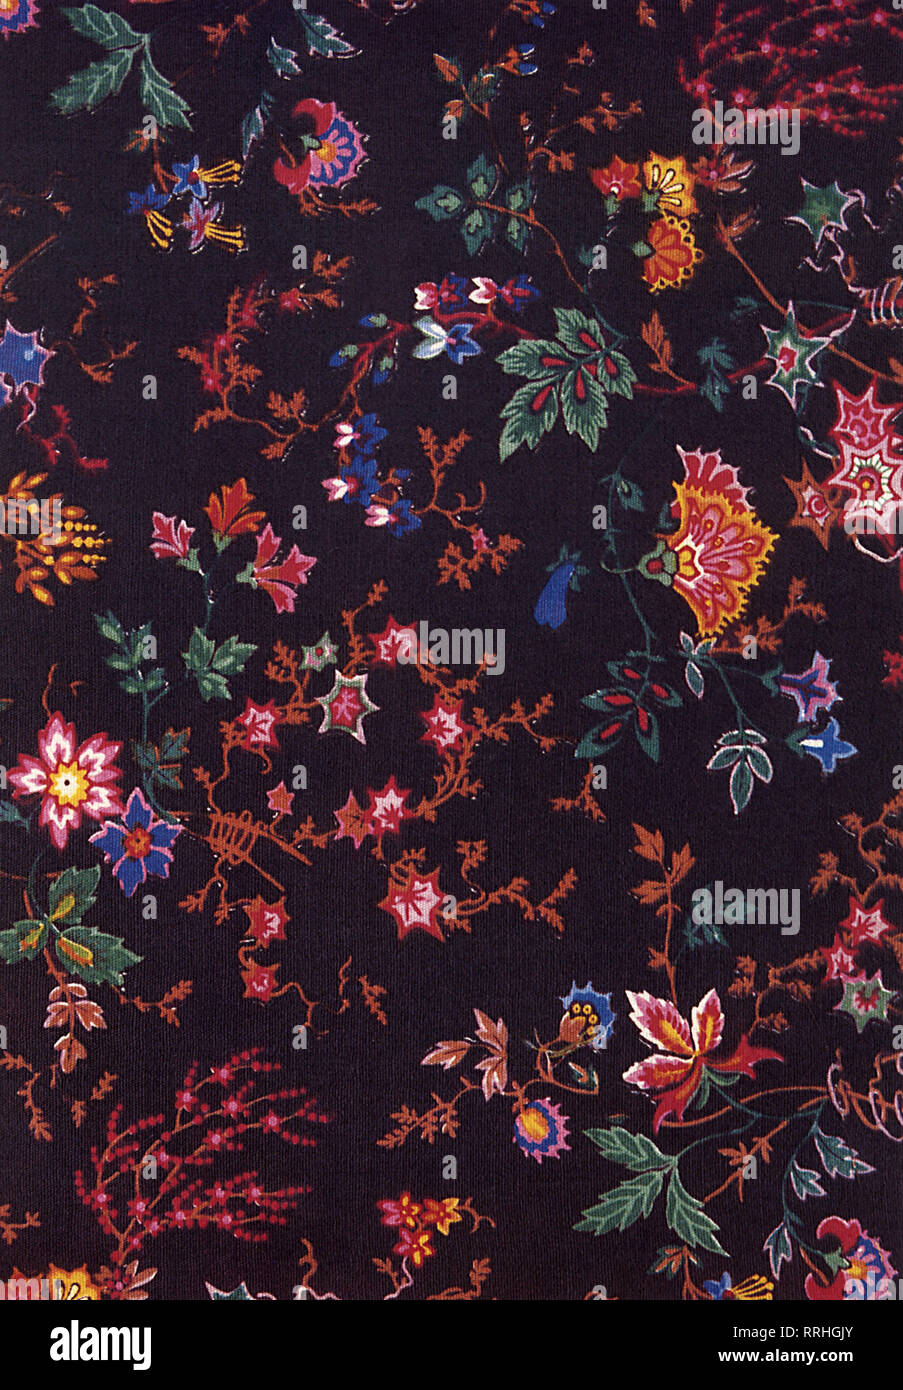 Colorful Floral repeat on black. Stock Photo